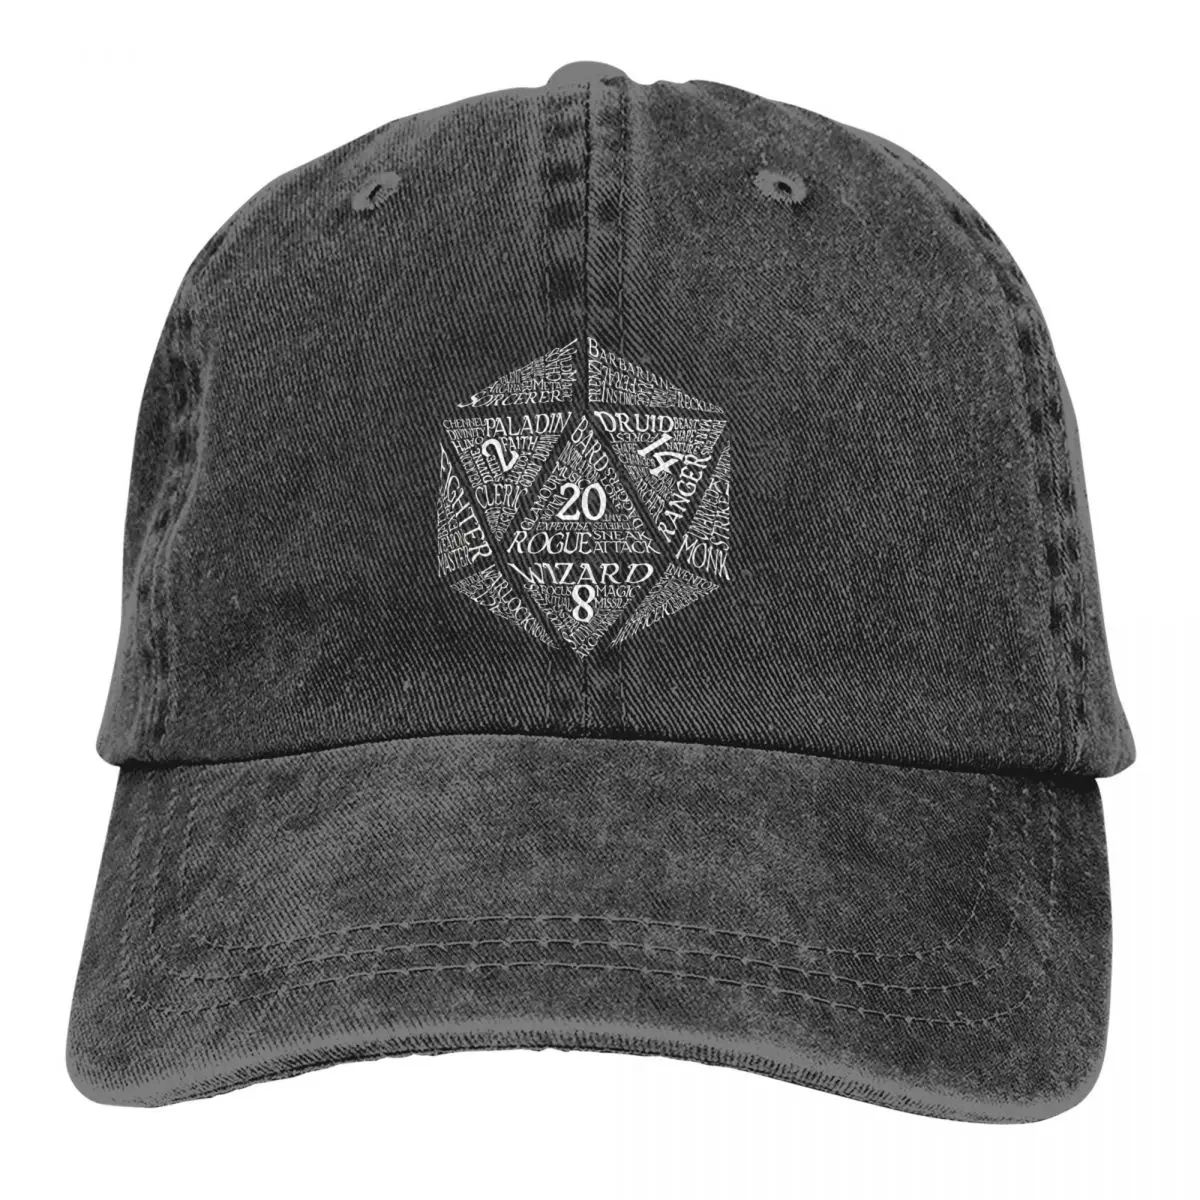 

Washed Men's Baseball Cap Table Top RPG D20 Trucker Snapback Caps Dad Hat DND Game Golf Hats